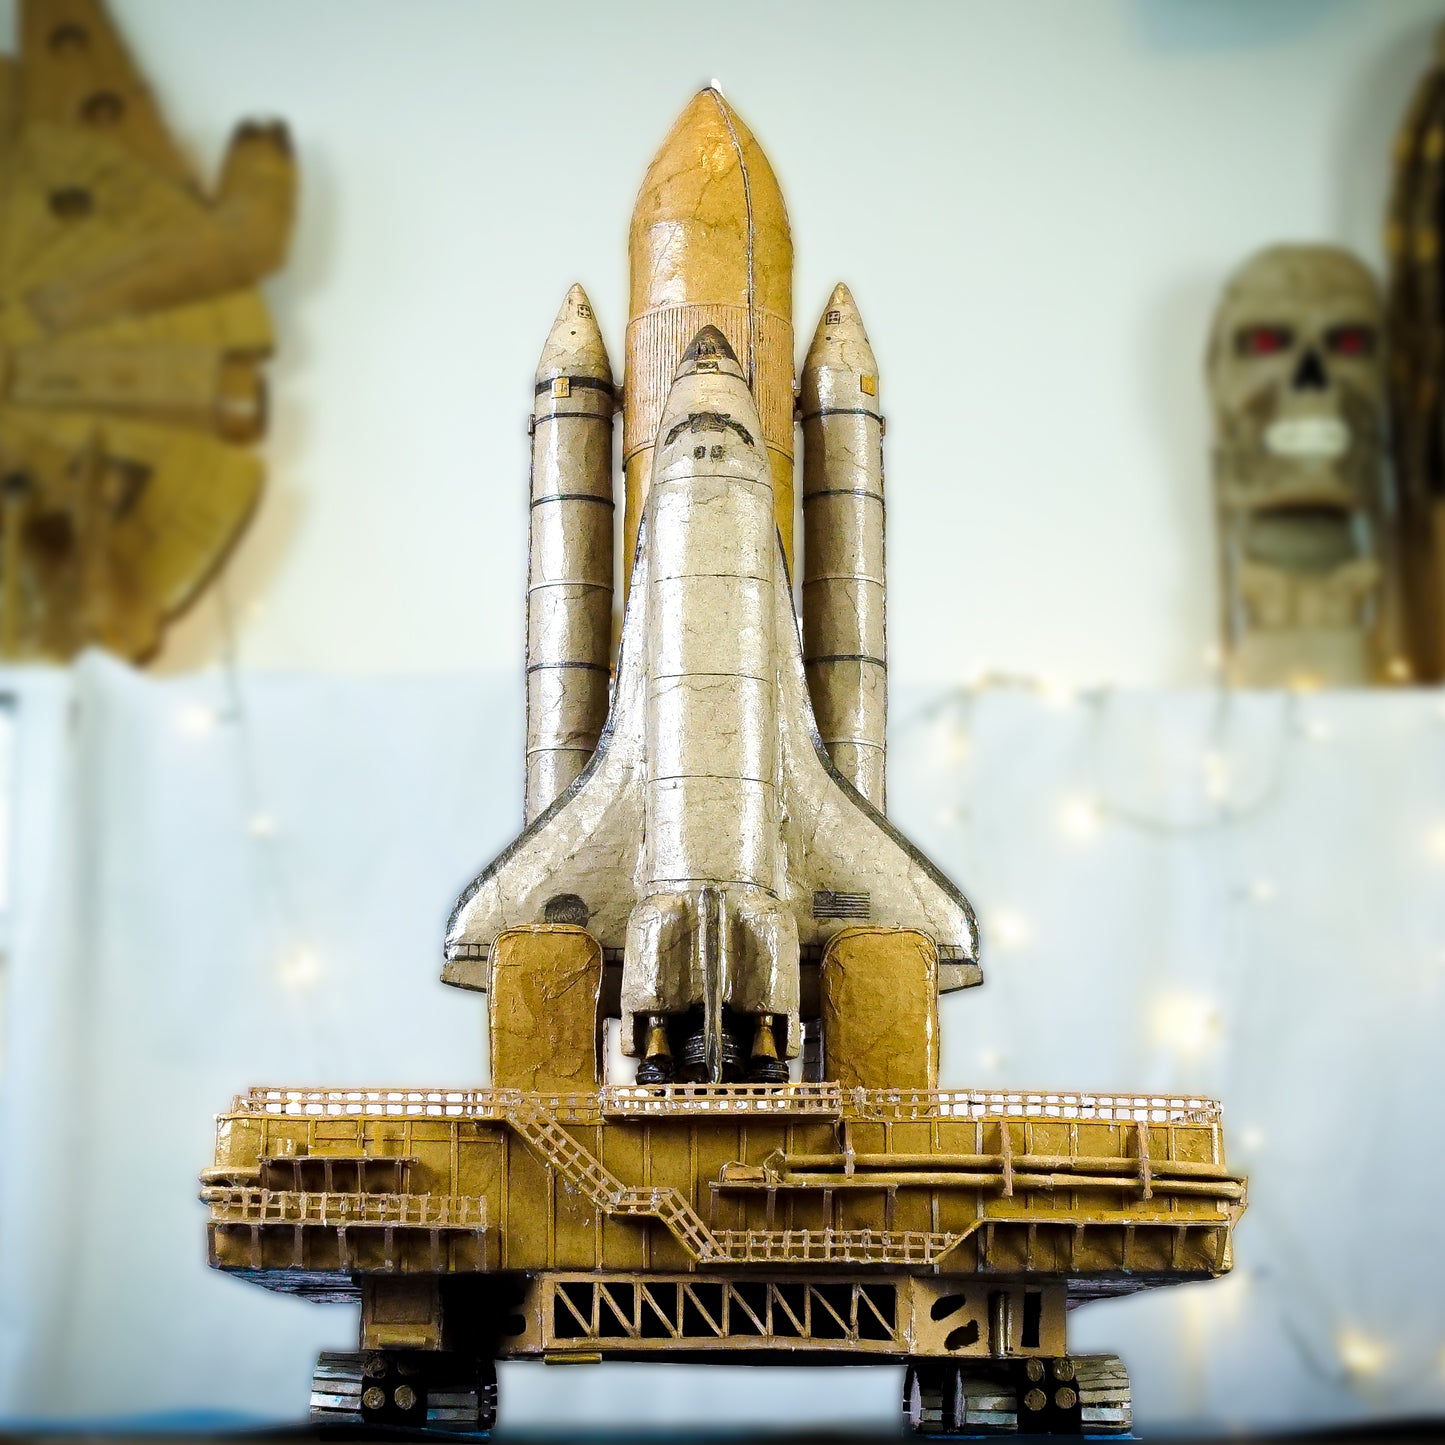 epic space shuttle pictures